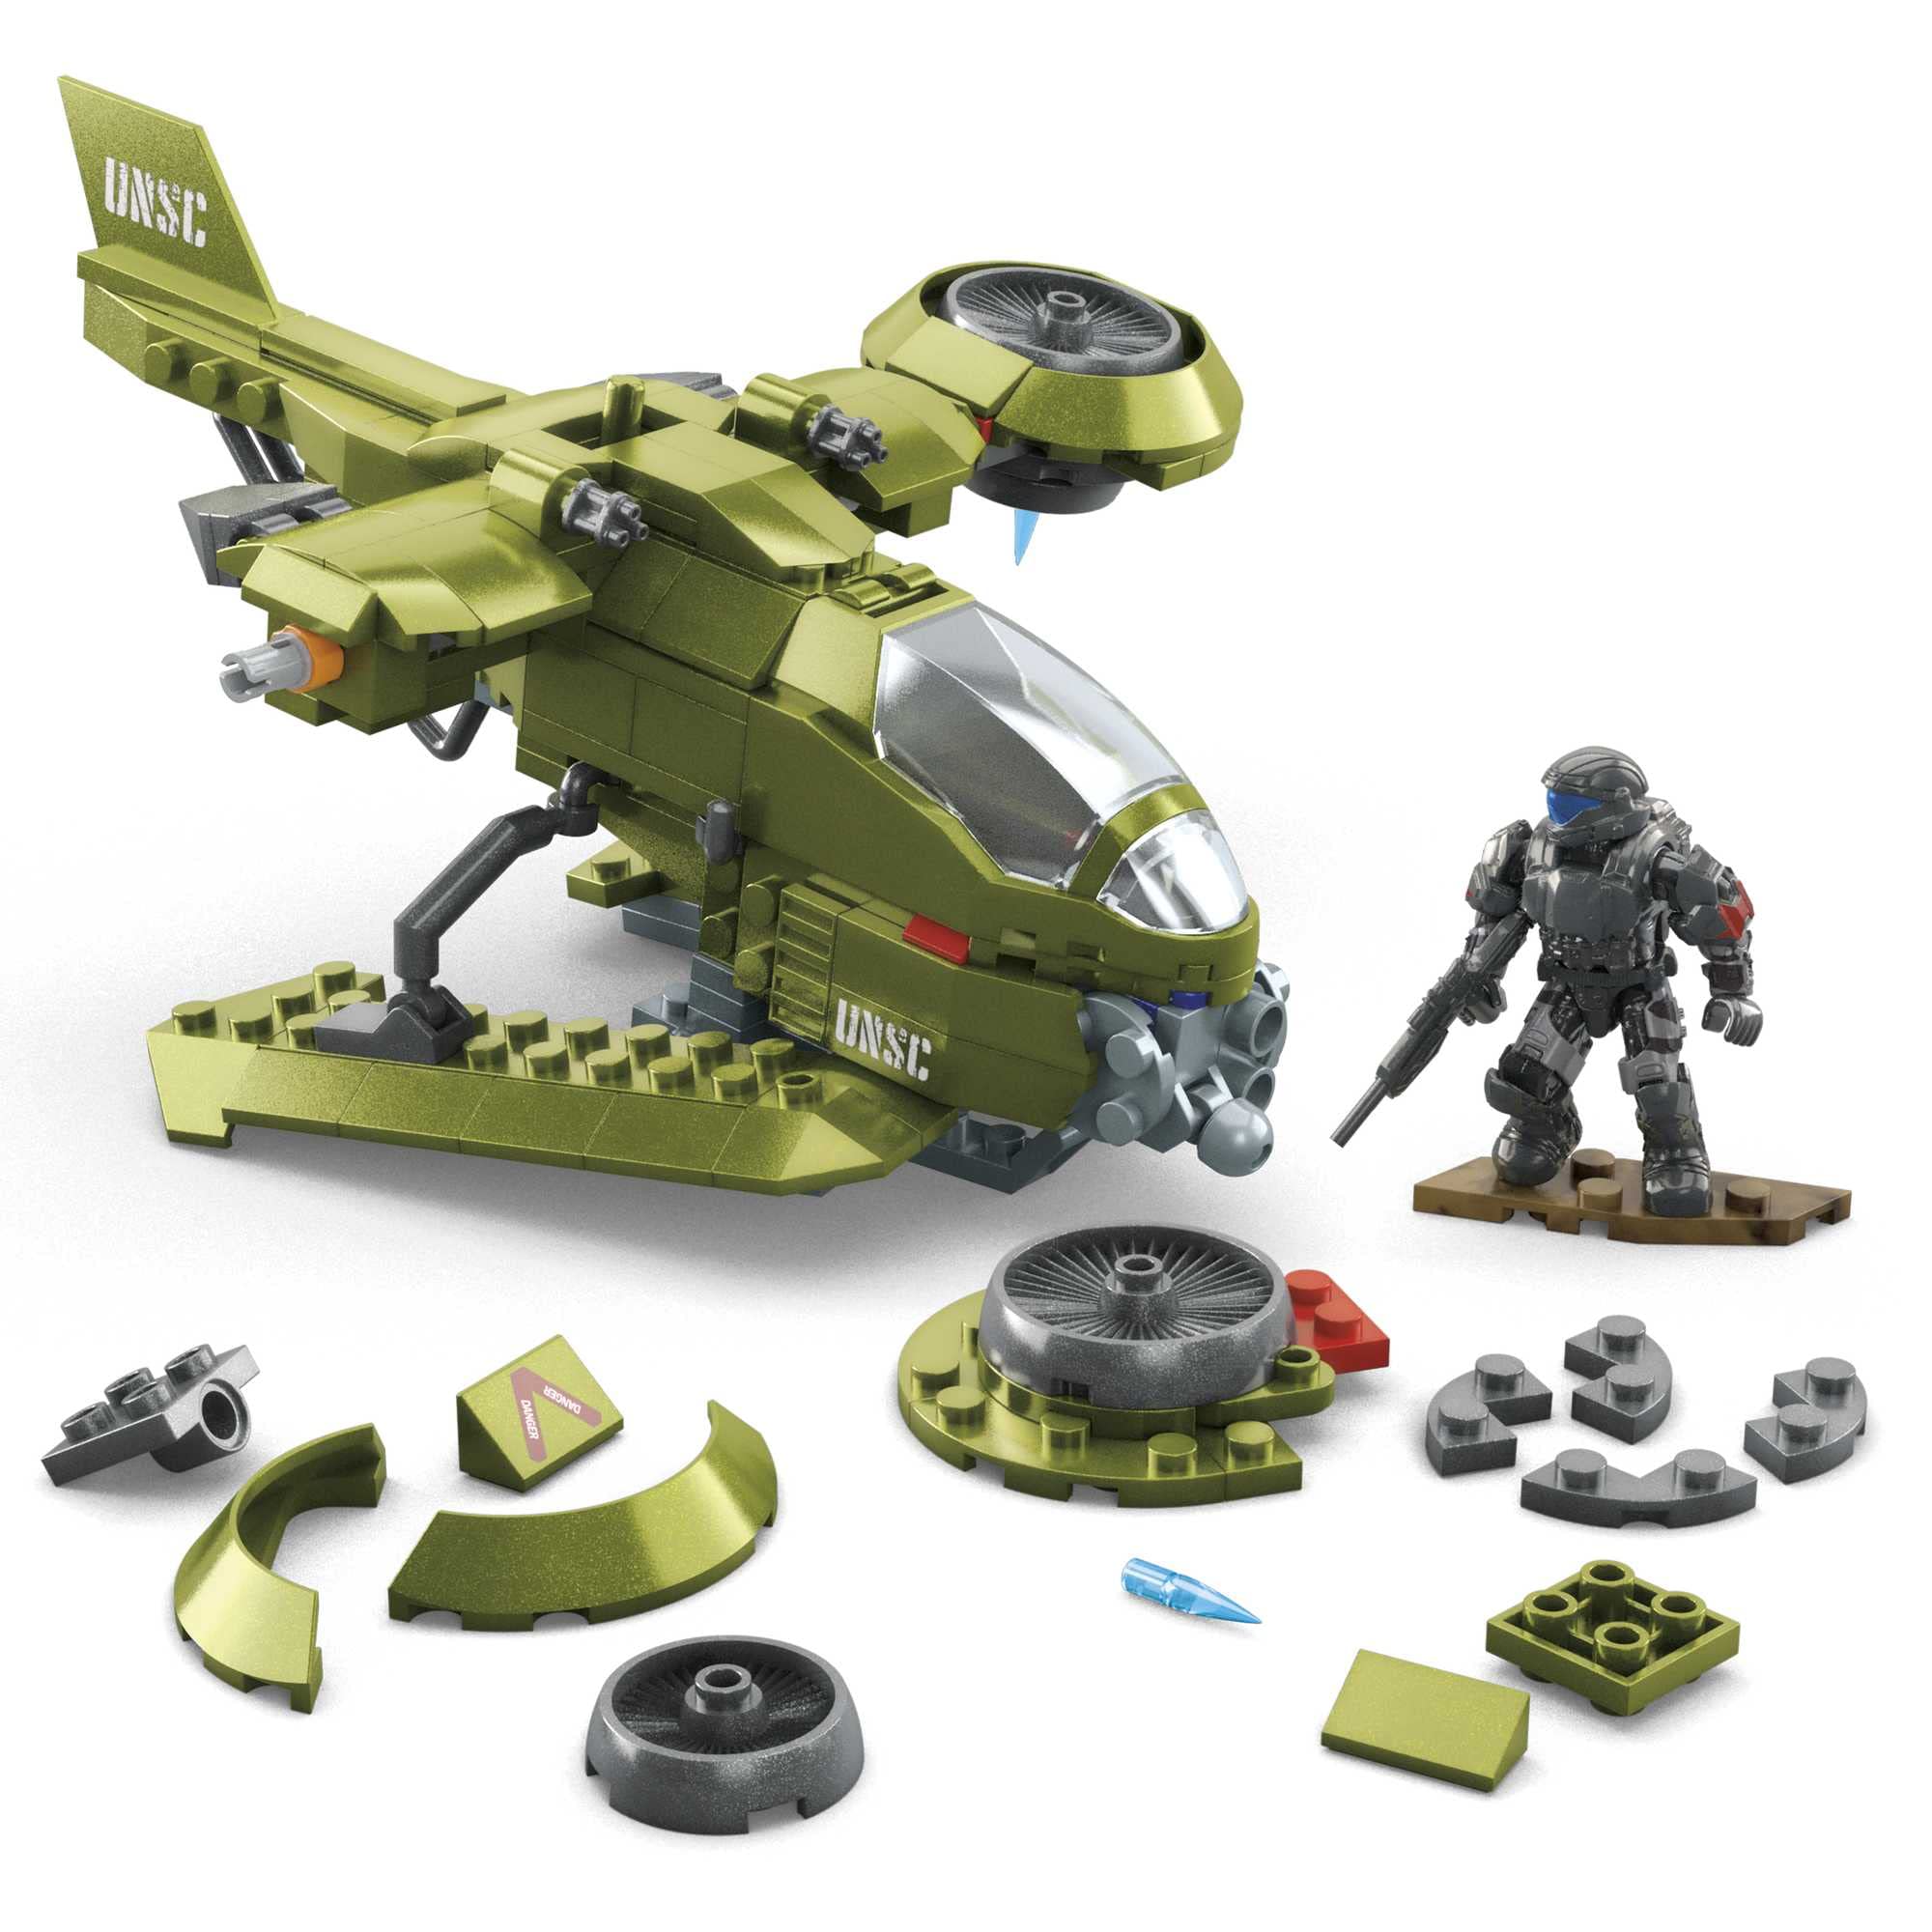 MEGA Halo Toys Vehicle Building Set for Kids, Unsc Hornet Recon Aircraft with 291 Pieces, 2 Micro Action Figures and Accessories, Gift Ideas